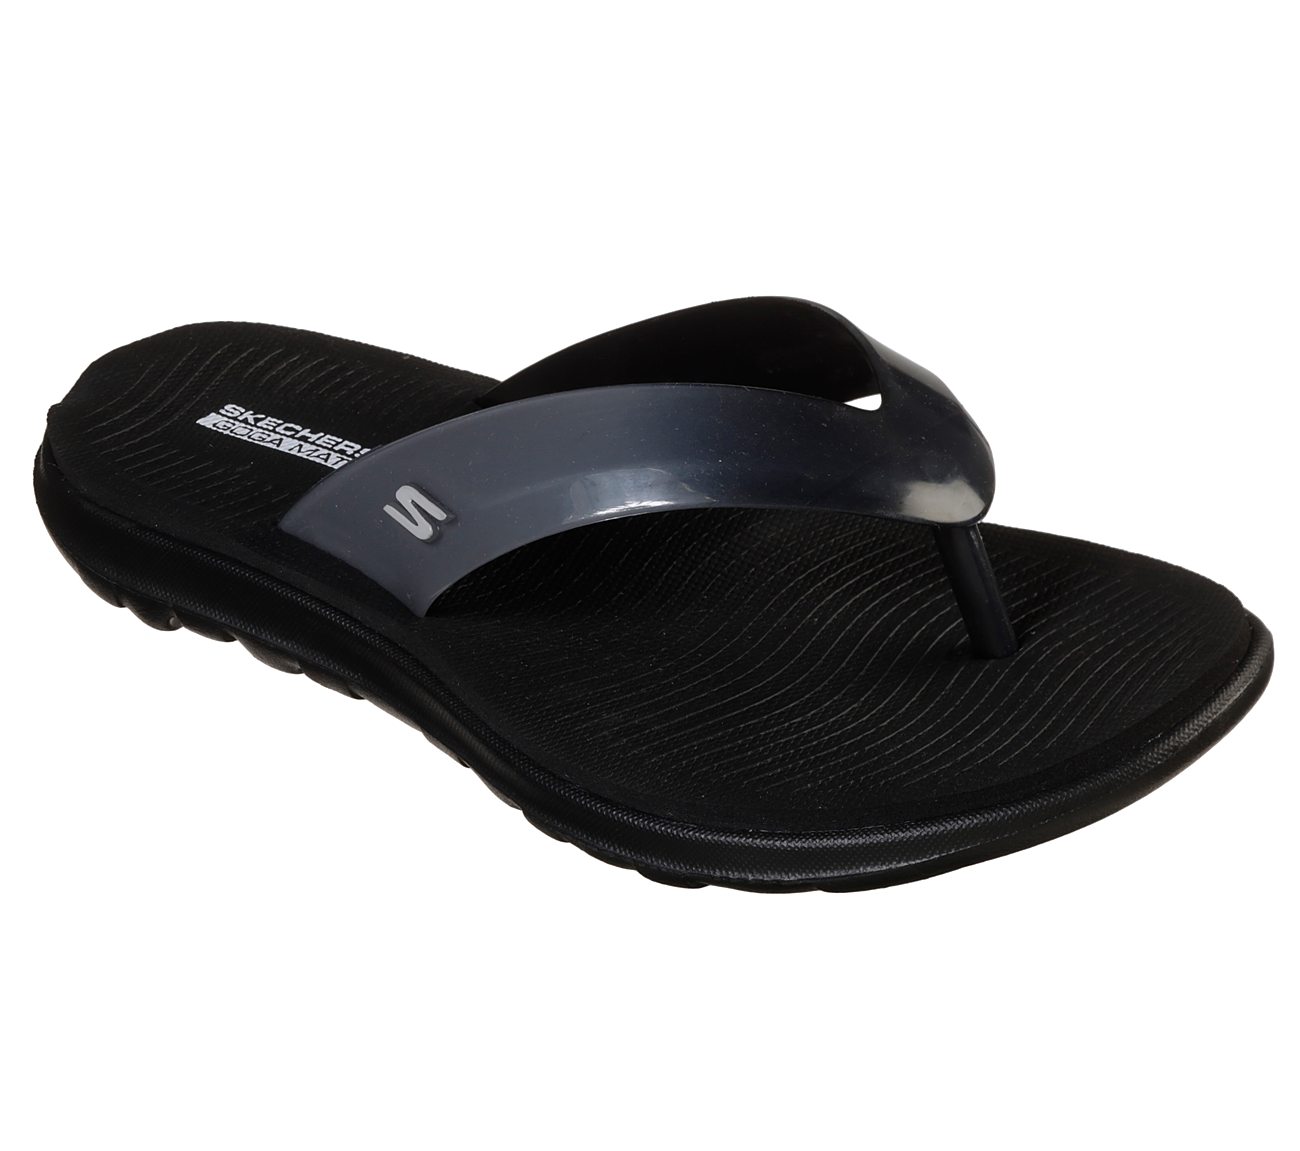 skechers on the go lightweight thong sandals